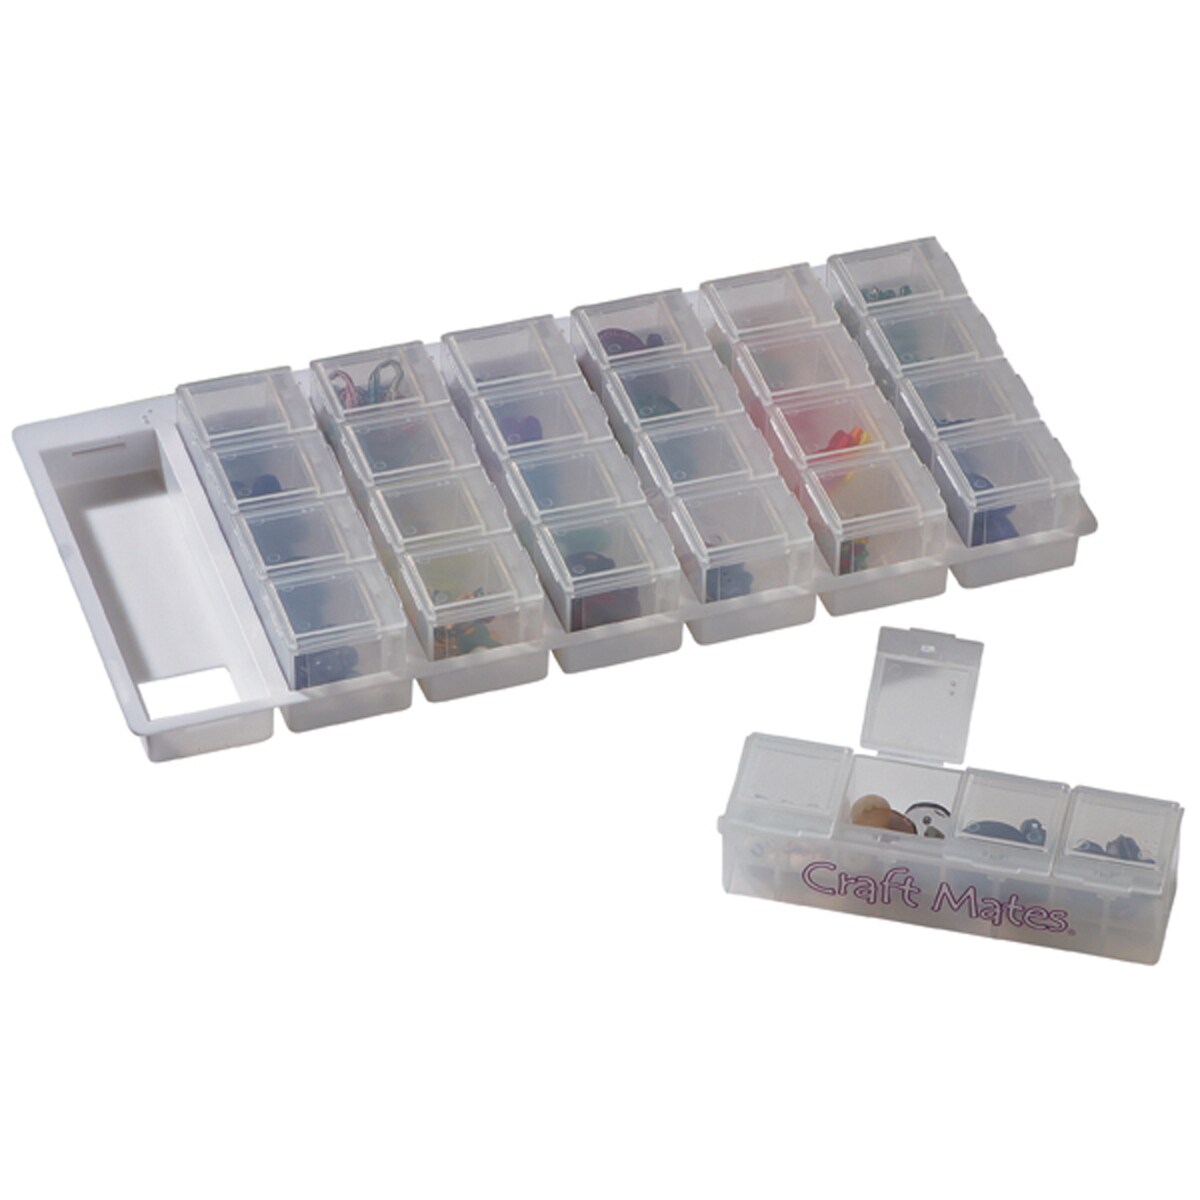  Craft Mates Bead Organizer And Plastic Containers Craft &  Sewing Supplies Storage, 4 Locking Compartments